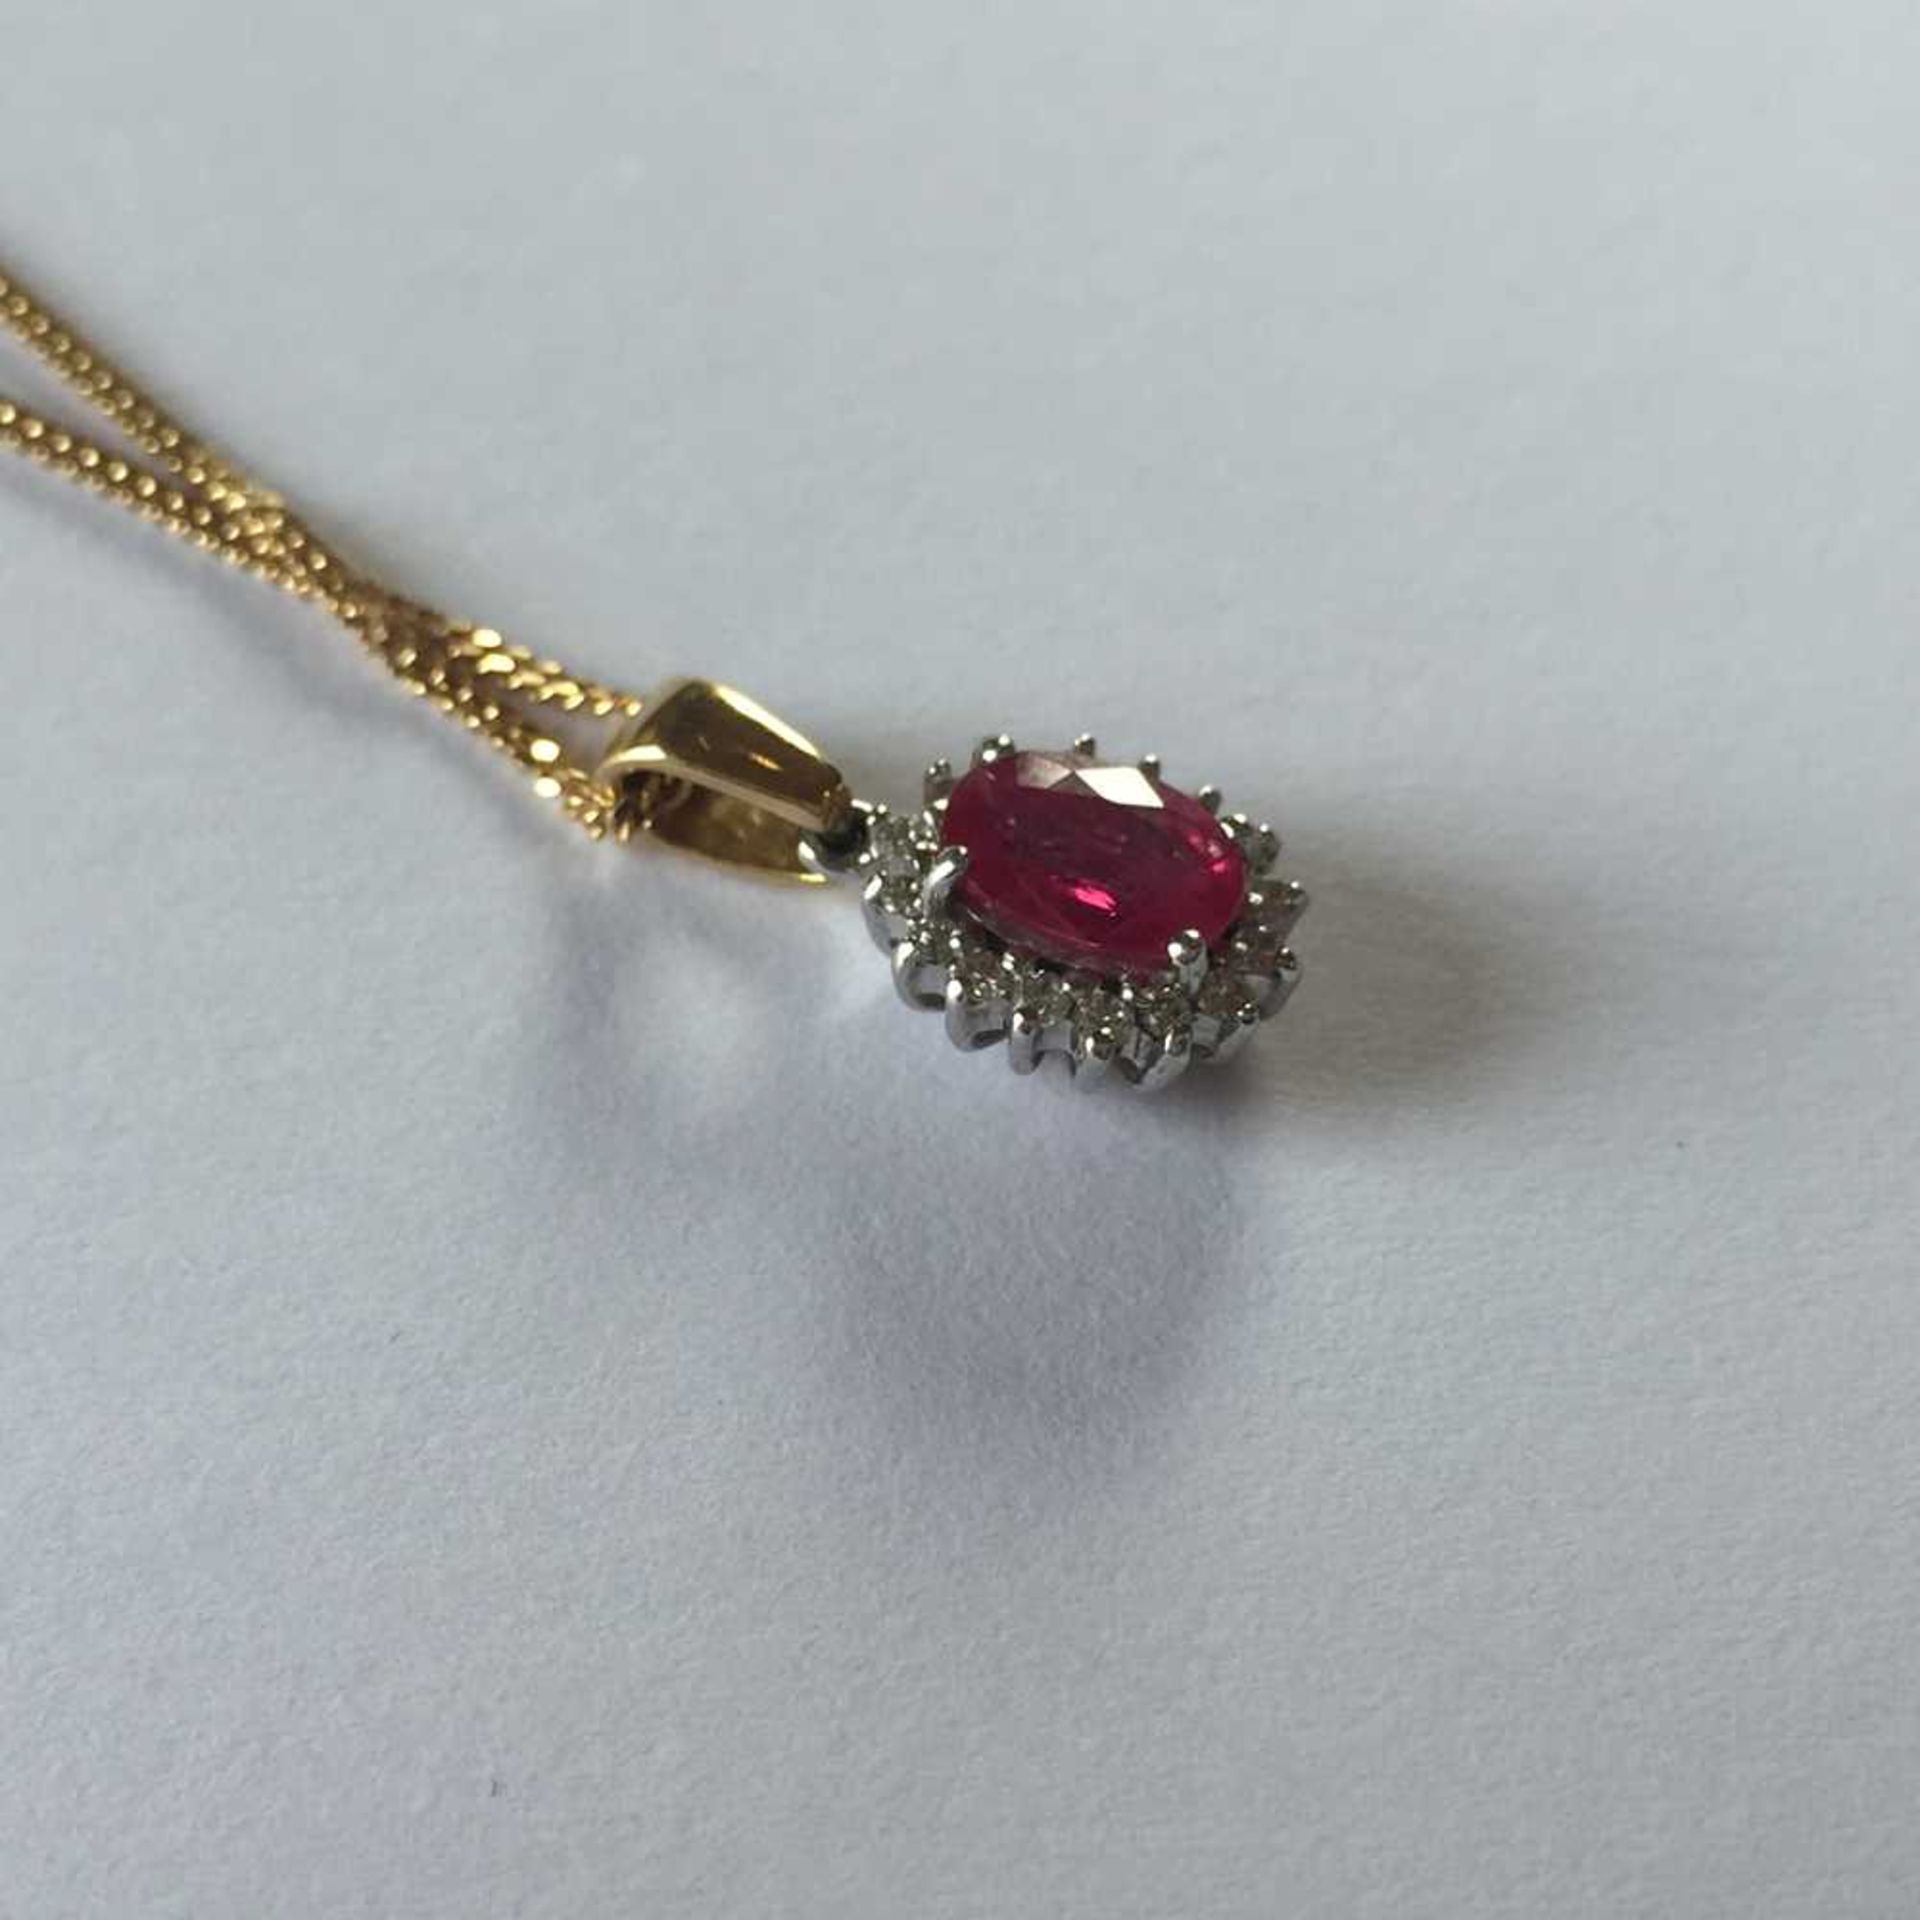 A pink sapphire and diamond pendant necklace - Image 12 of 17